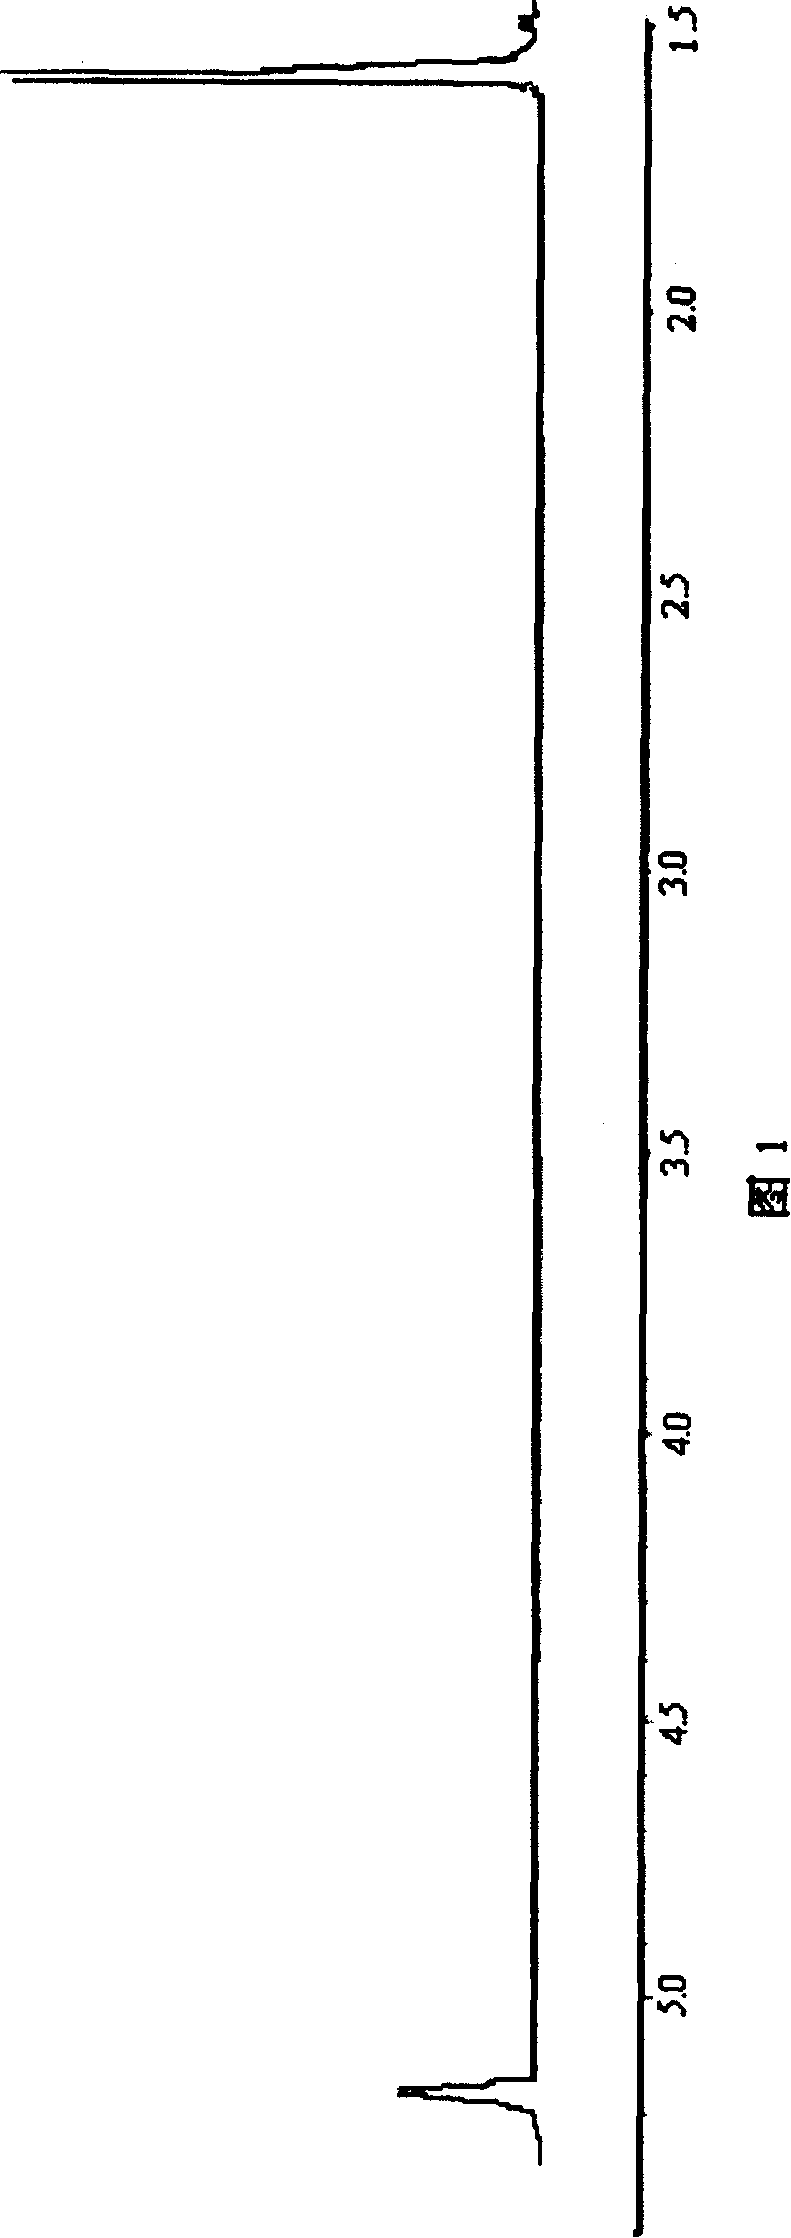 Method for preparing L-lactic acid and amino acid copolymer by melt-solid phase condensation polymerization